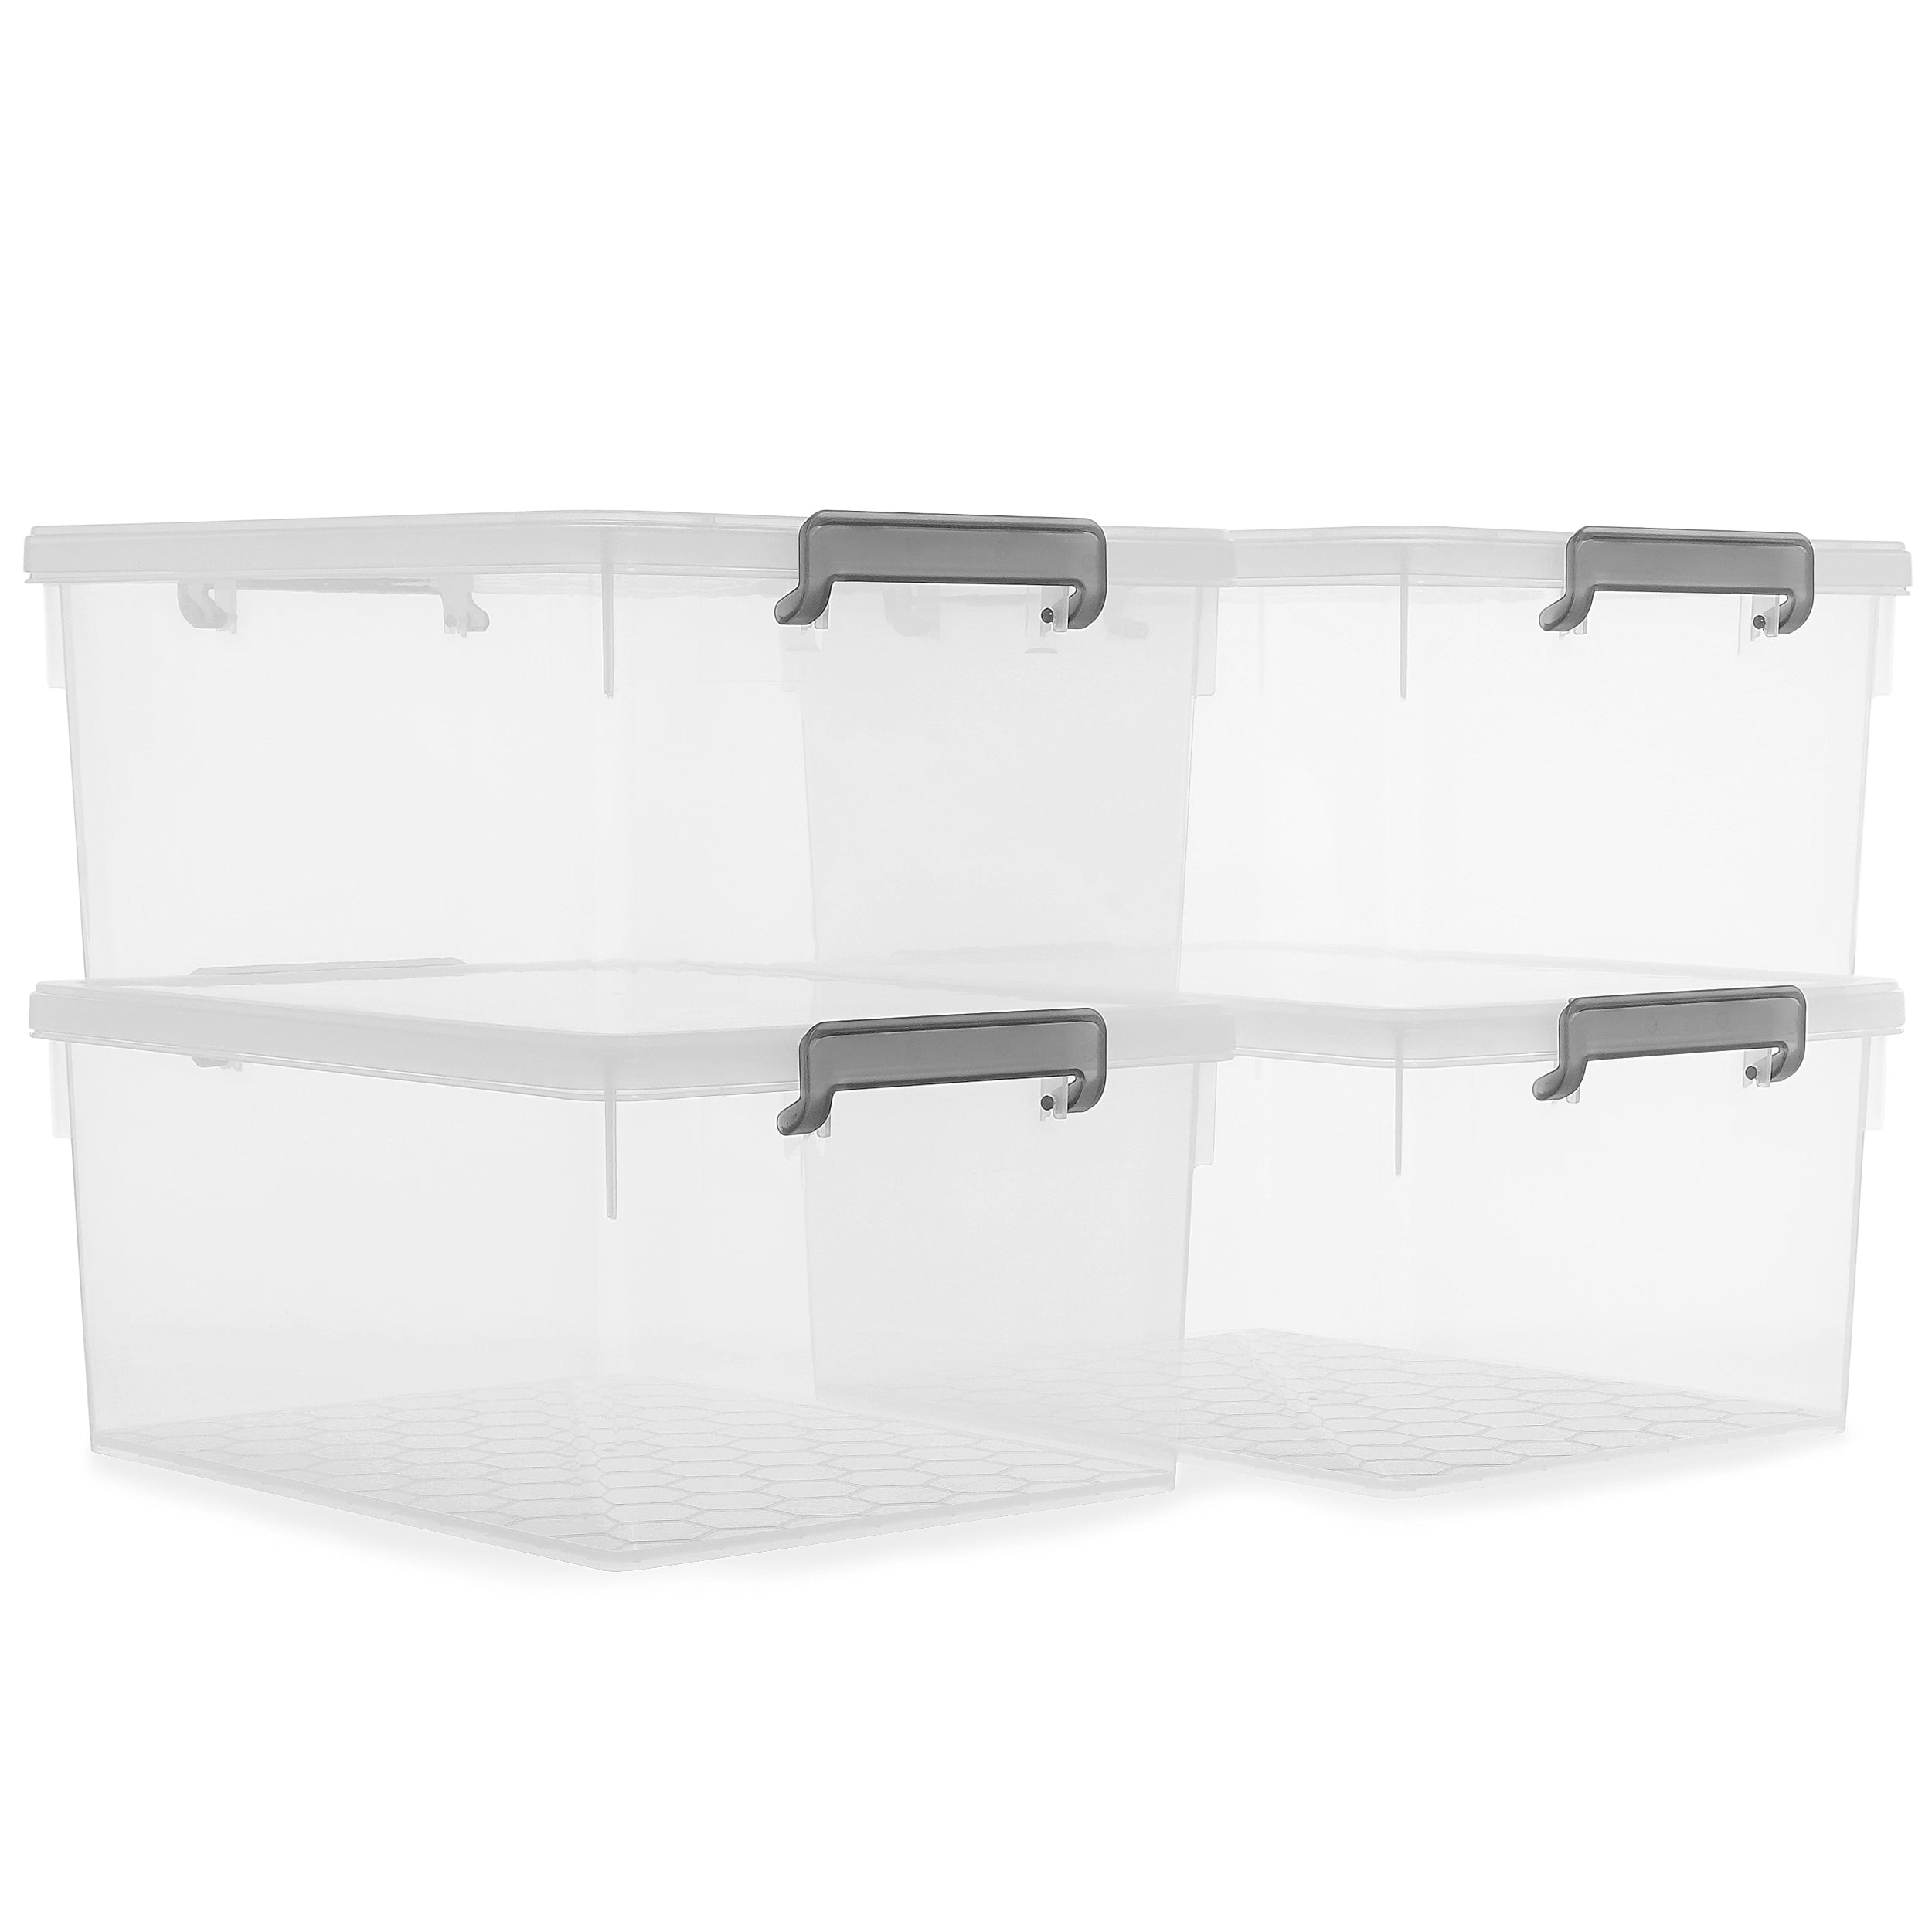 ToolUSA Clear Plastic Storage Box With Removable Dividers: TJ-48822